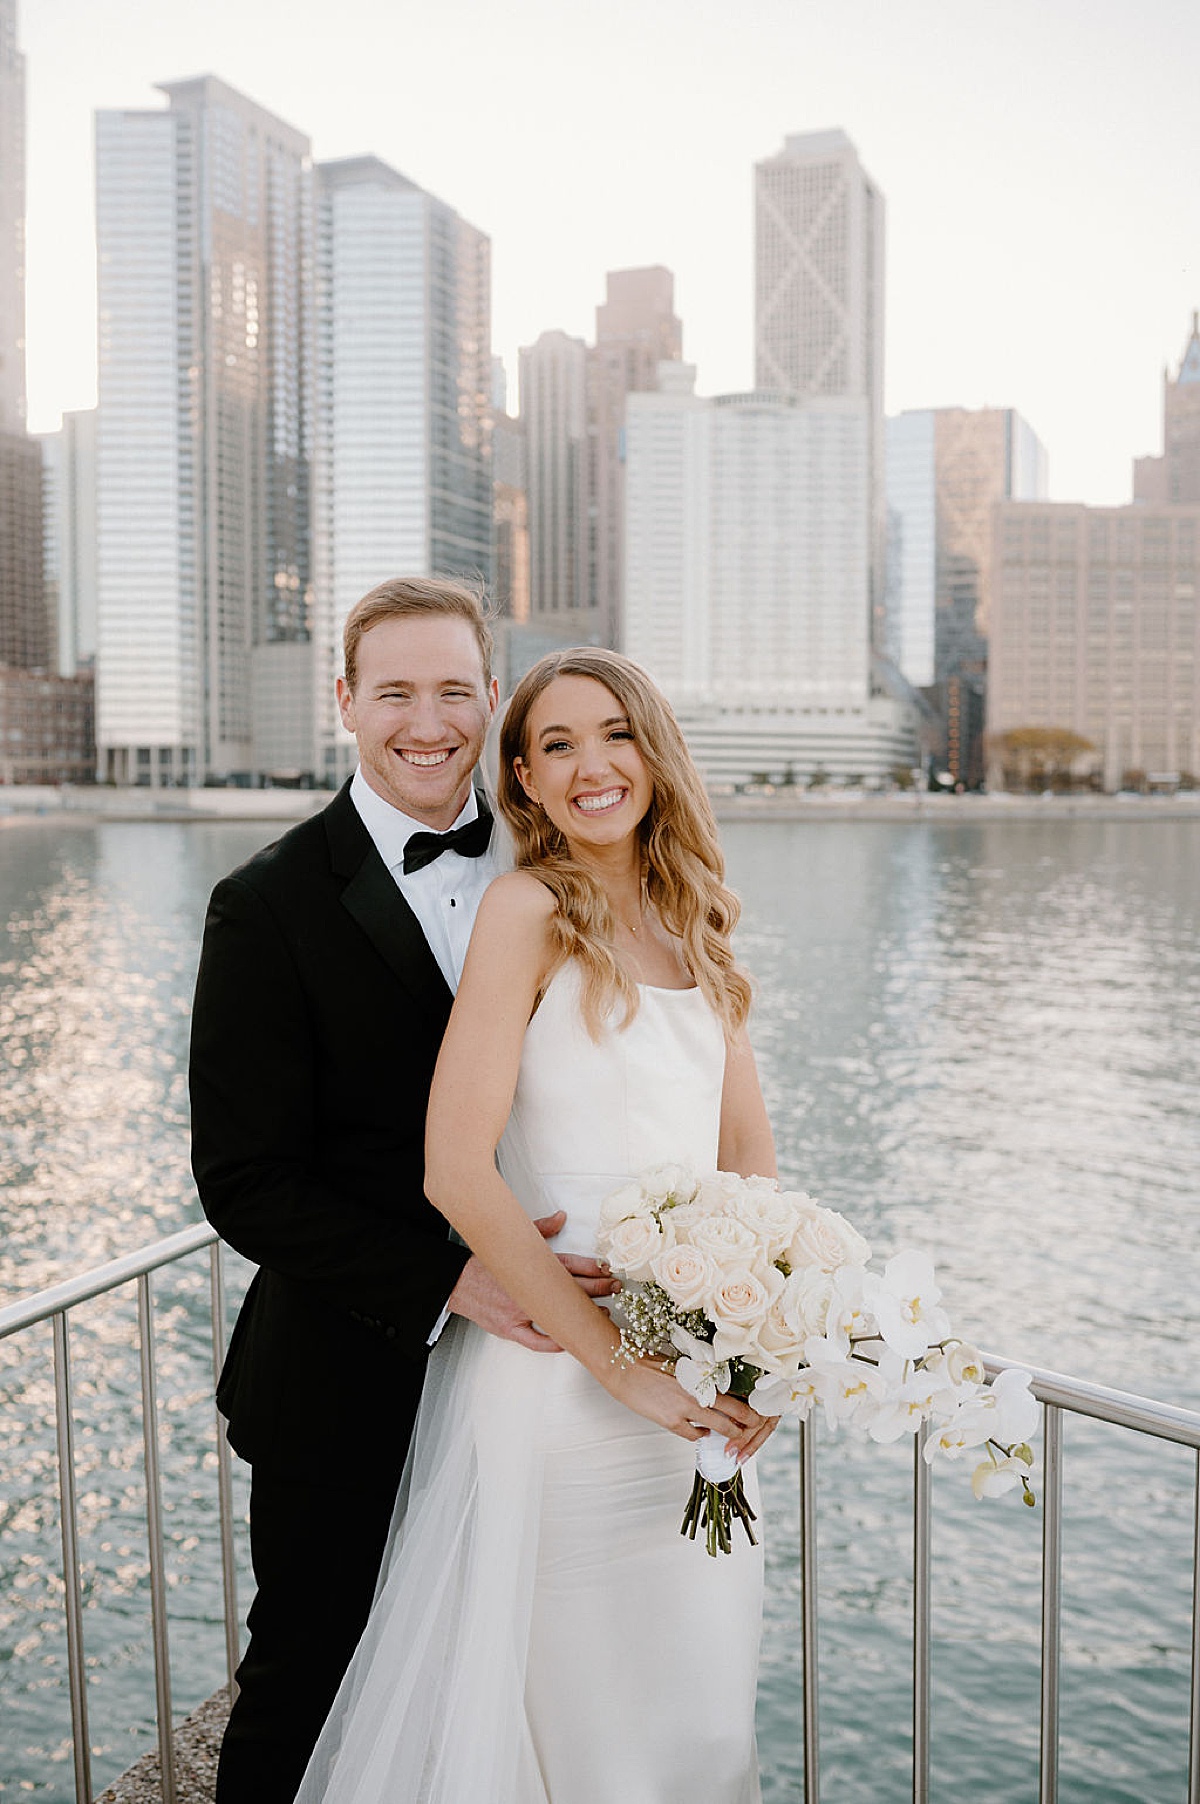 handsome bride and groom in pose overlooking the river in Chicago after elegant ceremony at the clark